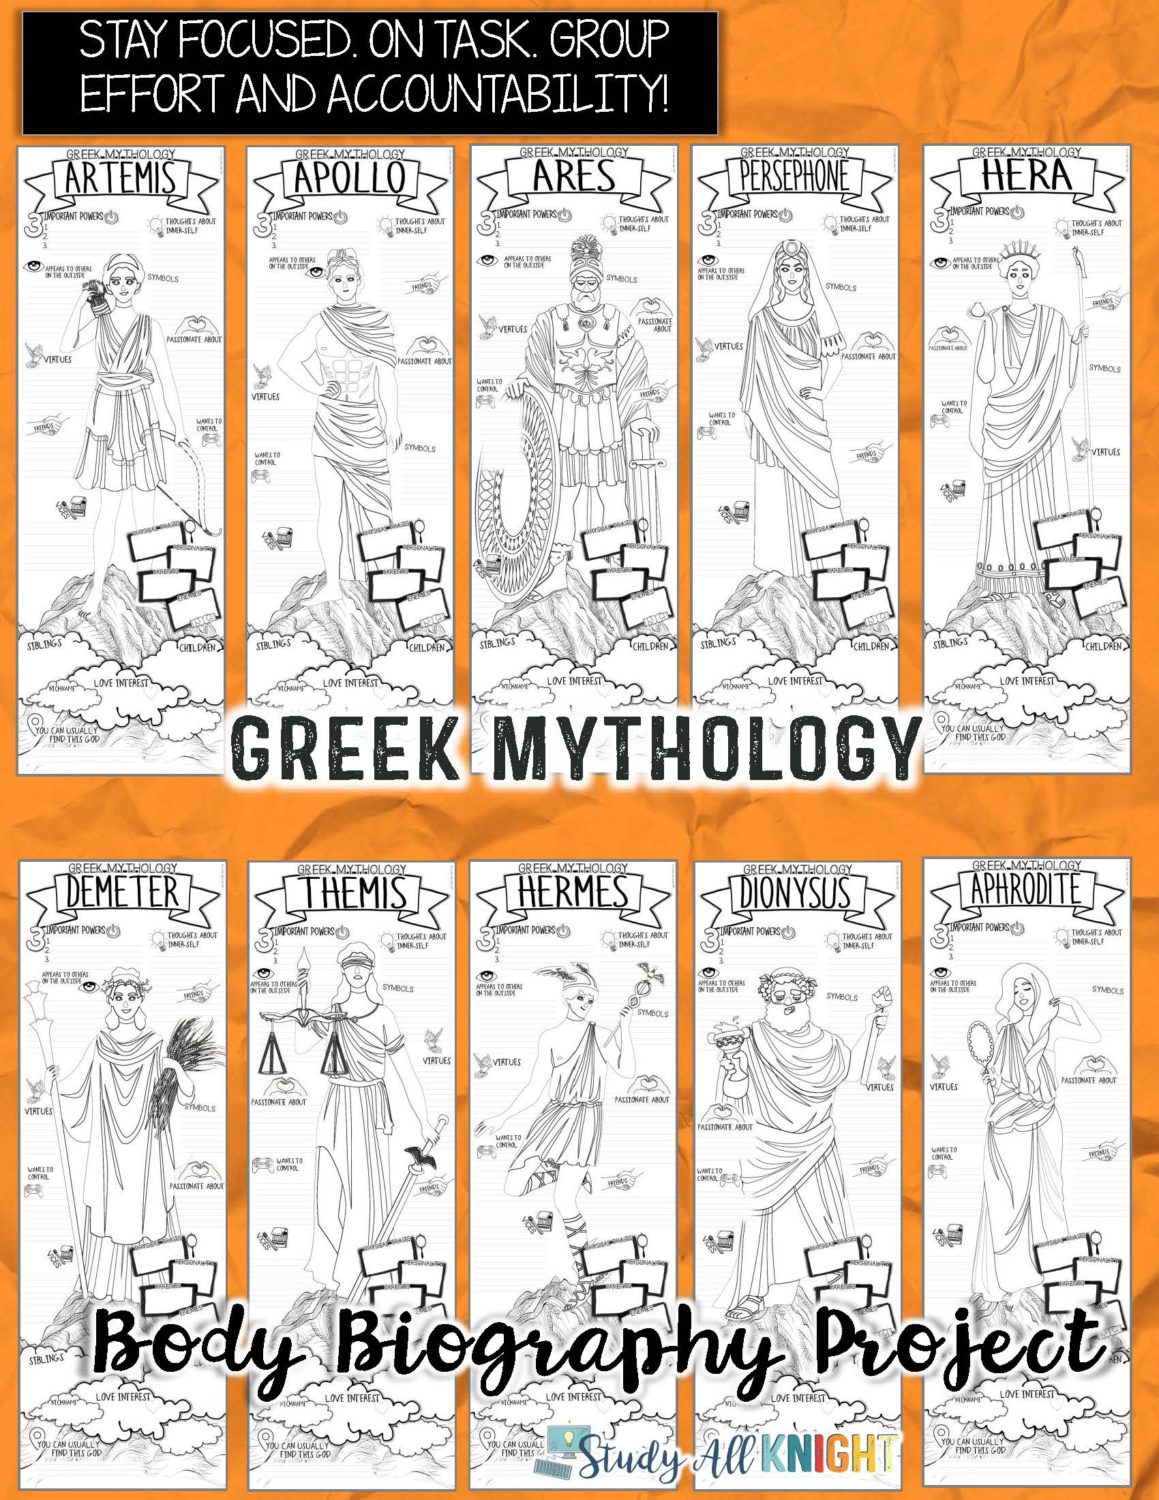 Fabulous Fun with Greek Mythology and Literature! Find out how to get students interested in Greek Mythology gods and goddesses character analysis exercise by using the body biography project. This is an engaging and memorable student-collaboration Greek Mythology activity. You can use this for The Odyssey, The Lightning Thief, Hercules, ancient history, Greek theater, Greek civilization, or for a fun mythology unit. #GreekMythology #MiddleSchool #Englishteacher